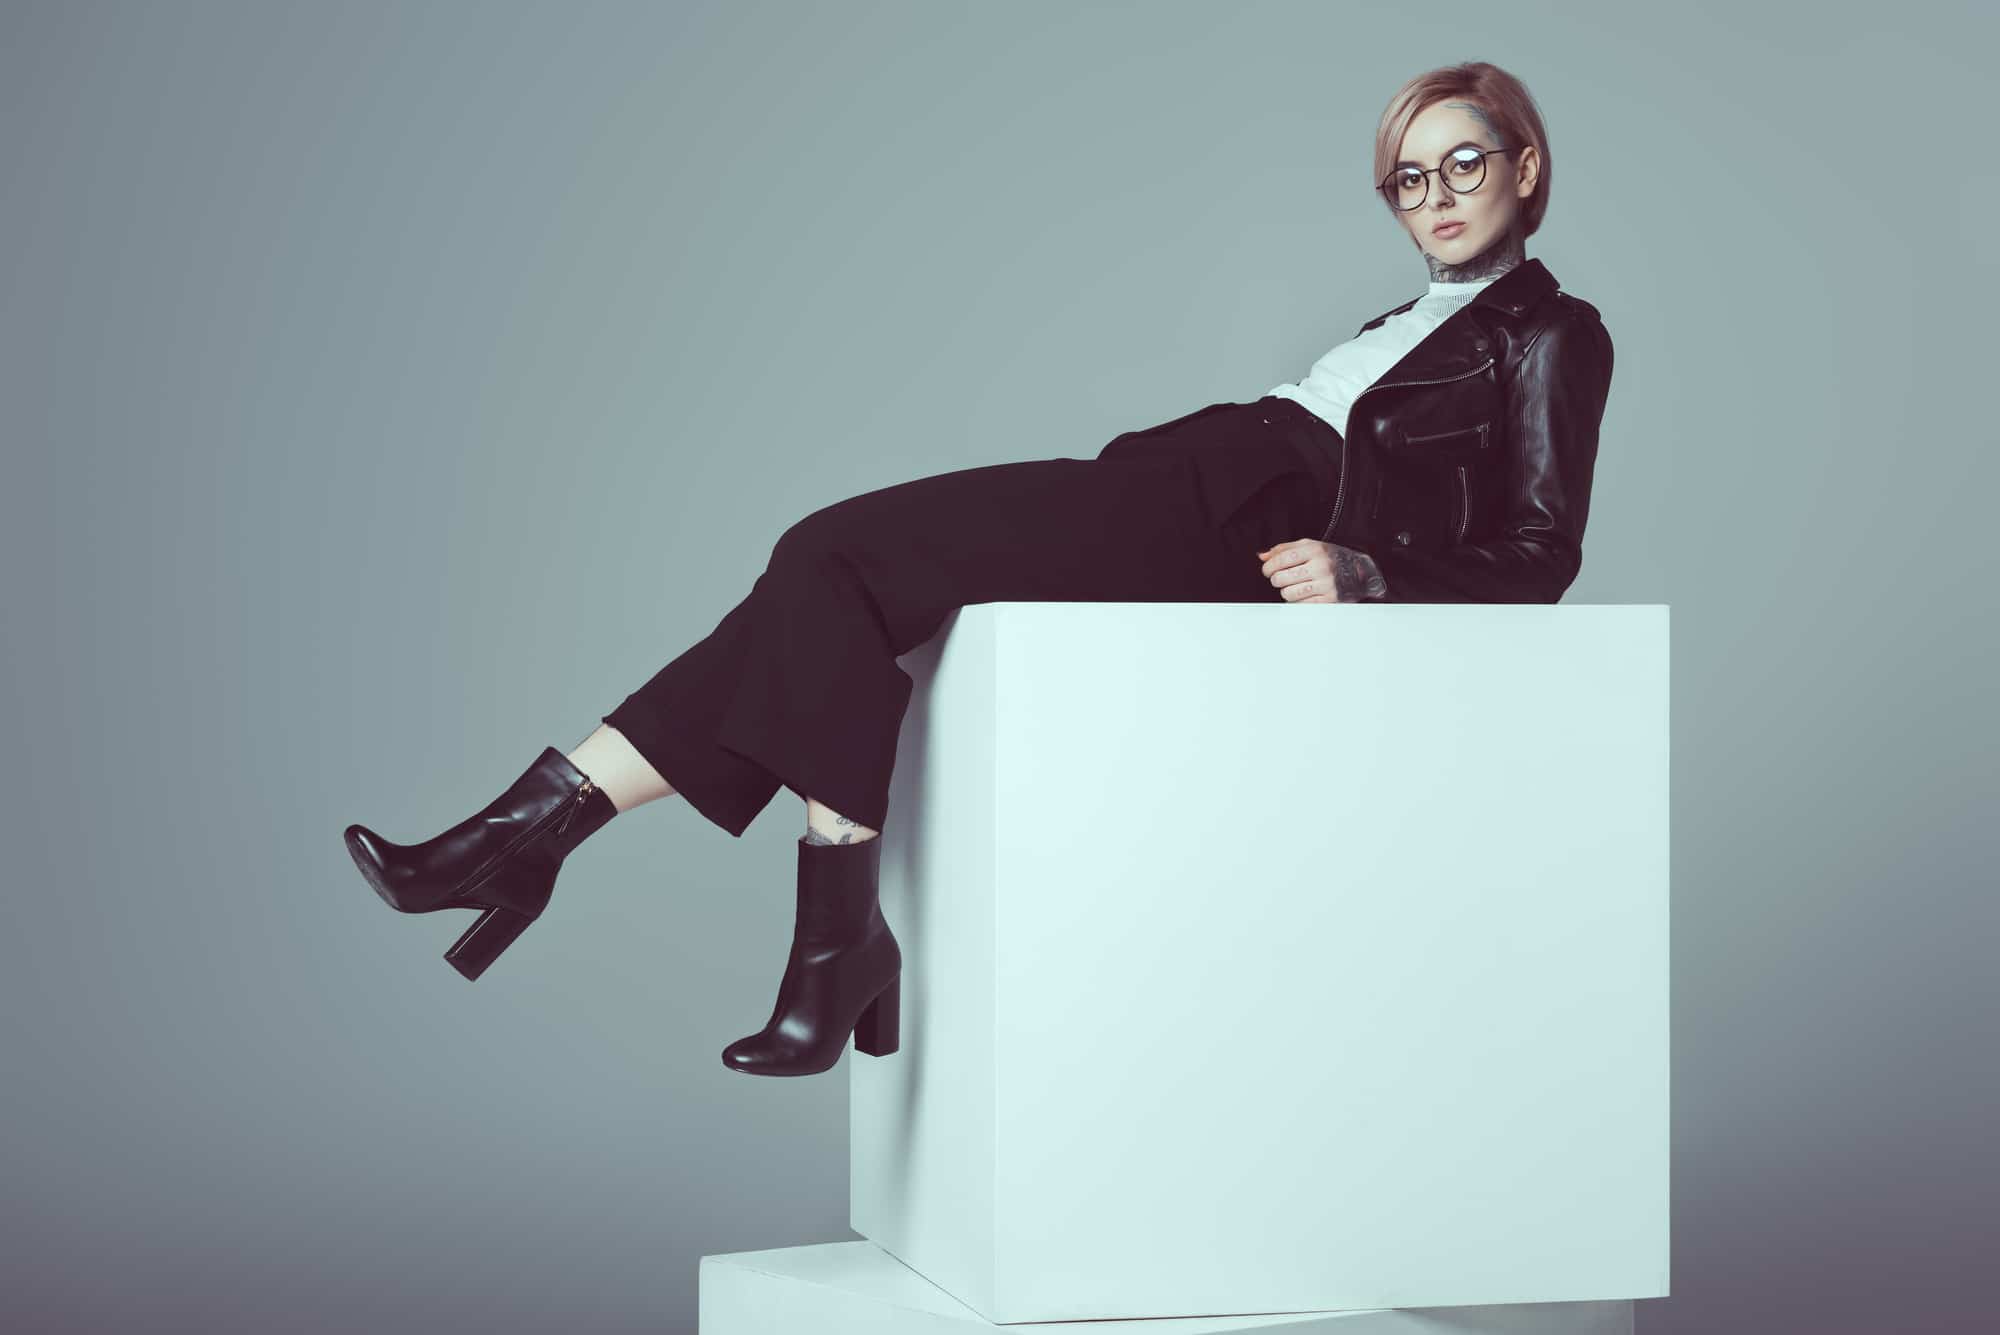 Blond woman in black pants, black boots, black leather jacket and white blouse leaning back on large white block.